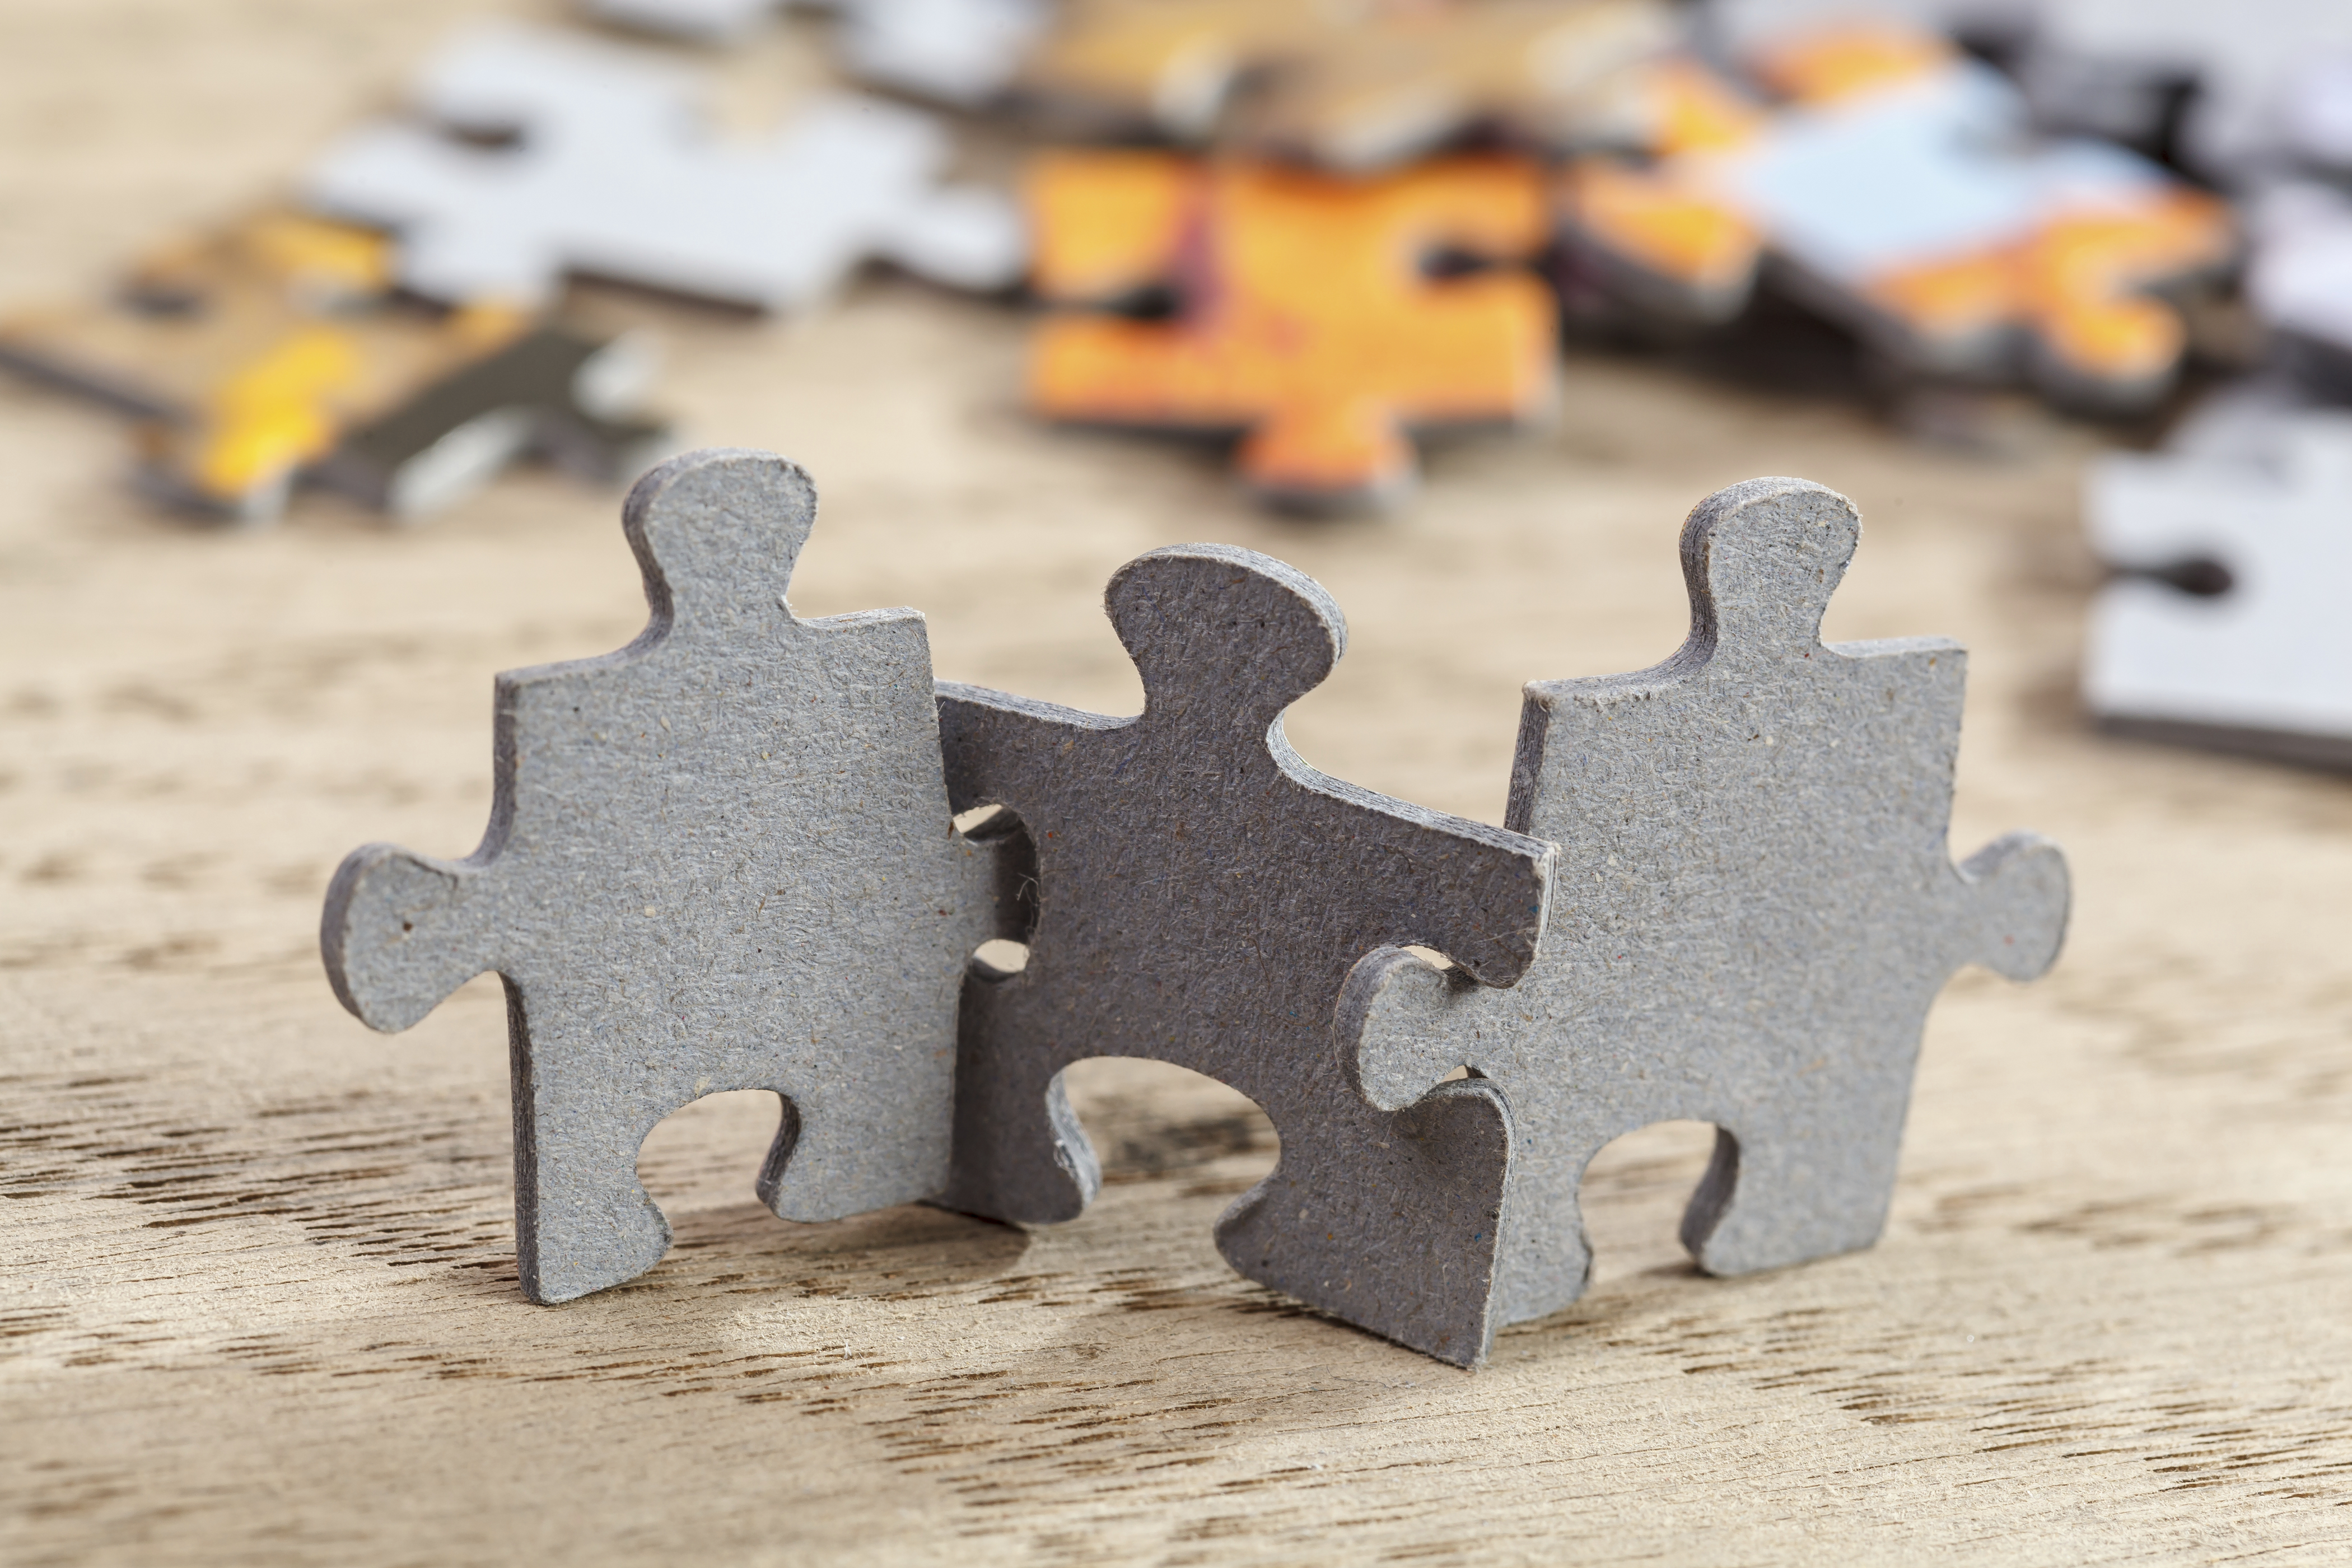 Concept of teamwork: Three jigsaw puzzle pieces on a table joint together. Shallow depth of field